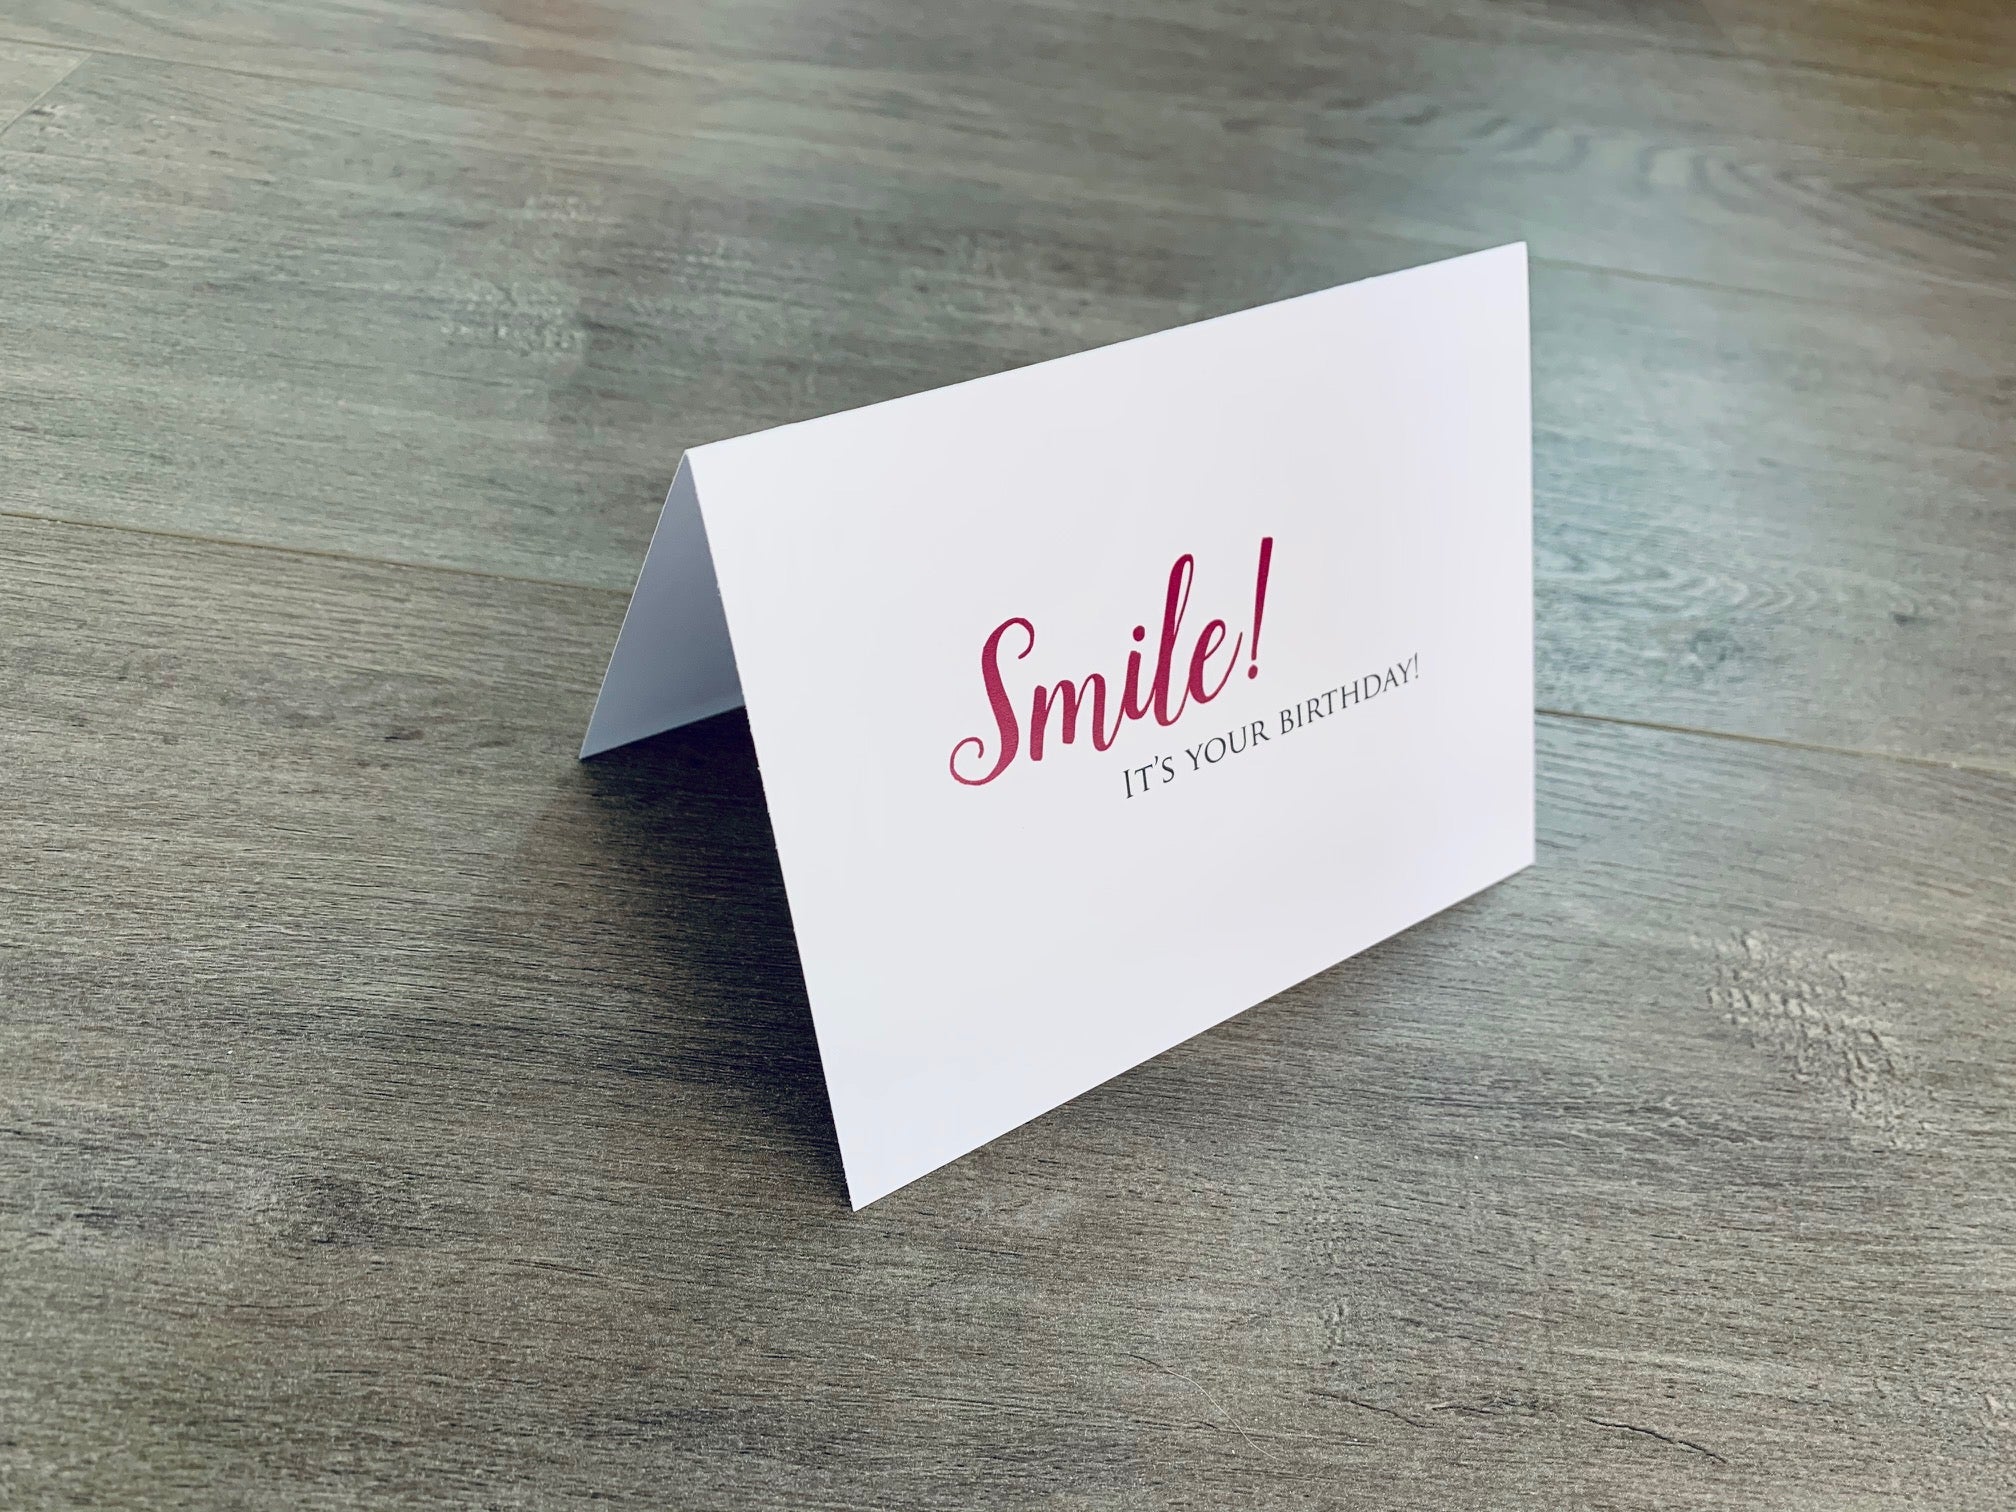 A white card is propped on a gray wood floor. The card reads, "Smile! It's your birthday!" Birthday card by Stationare